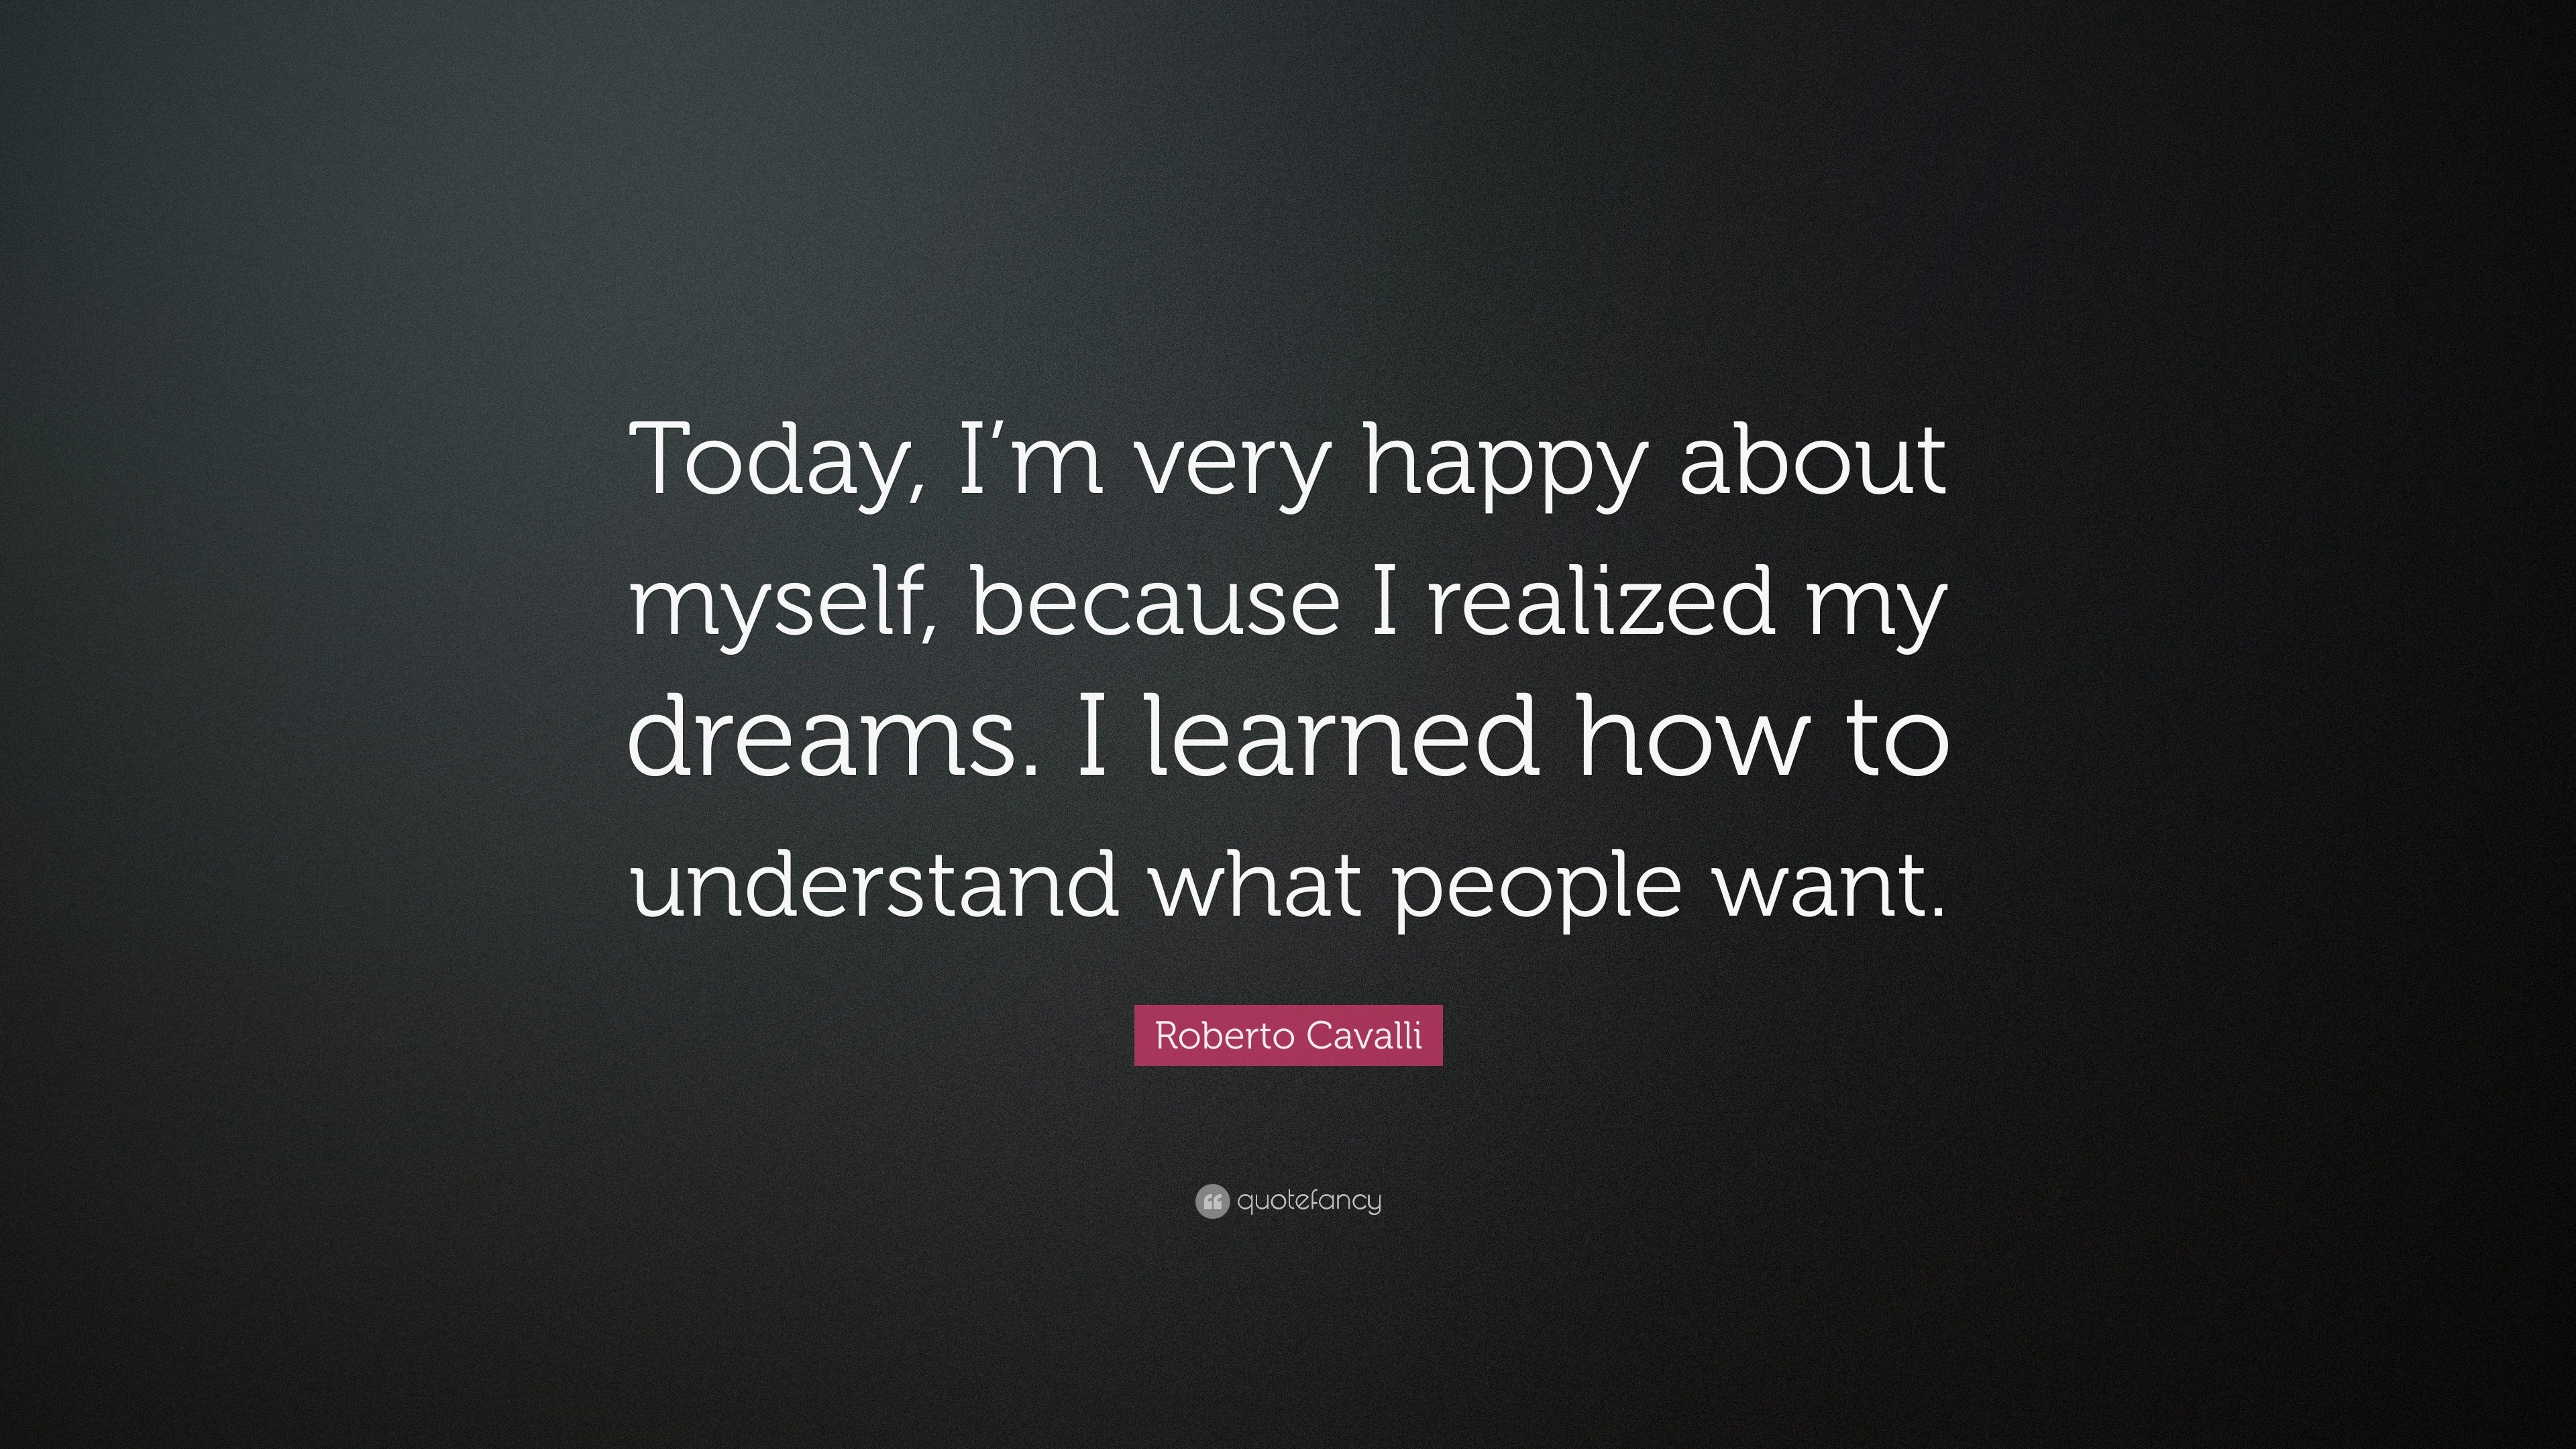 Roberto Cavalli Quote Today I M Very Happy About Myself Because I Realized My Dreams I